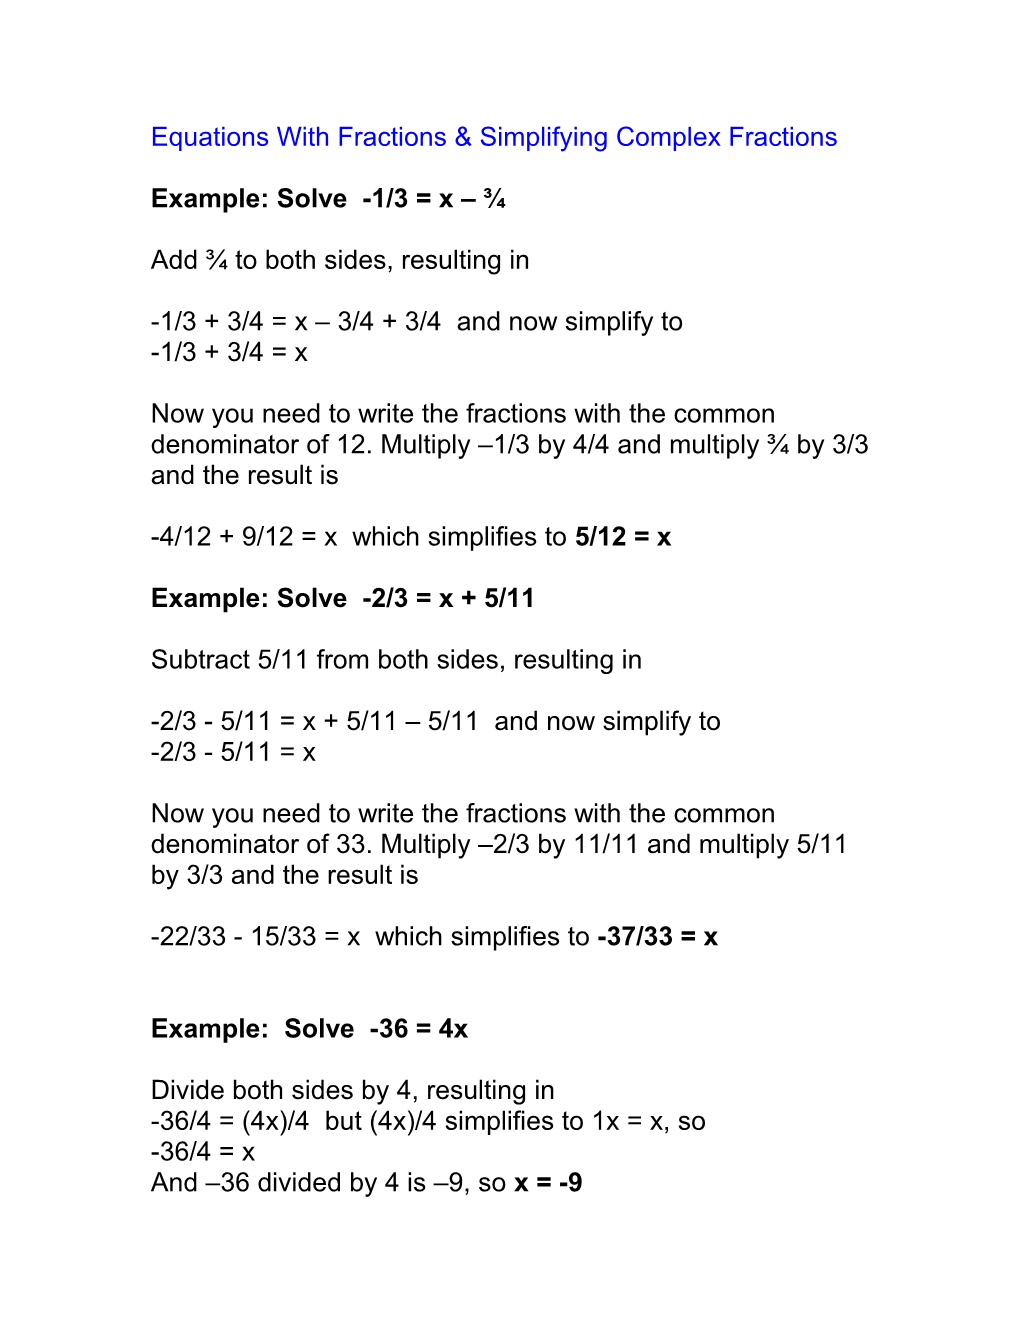 Equations with Fractions & Simplifying Complex Fractions